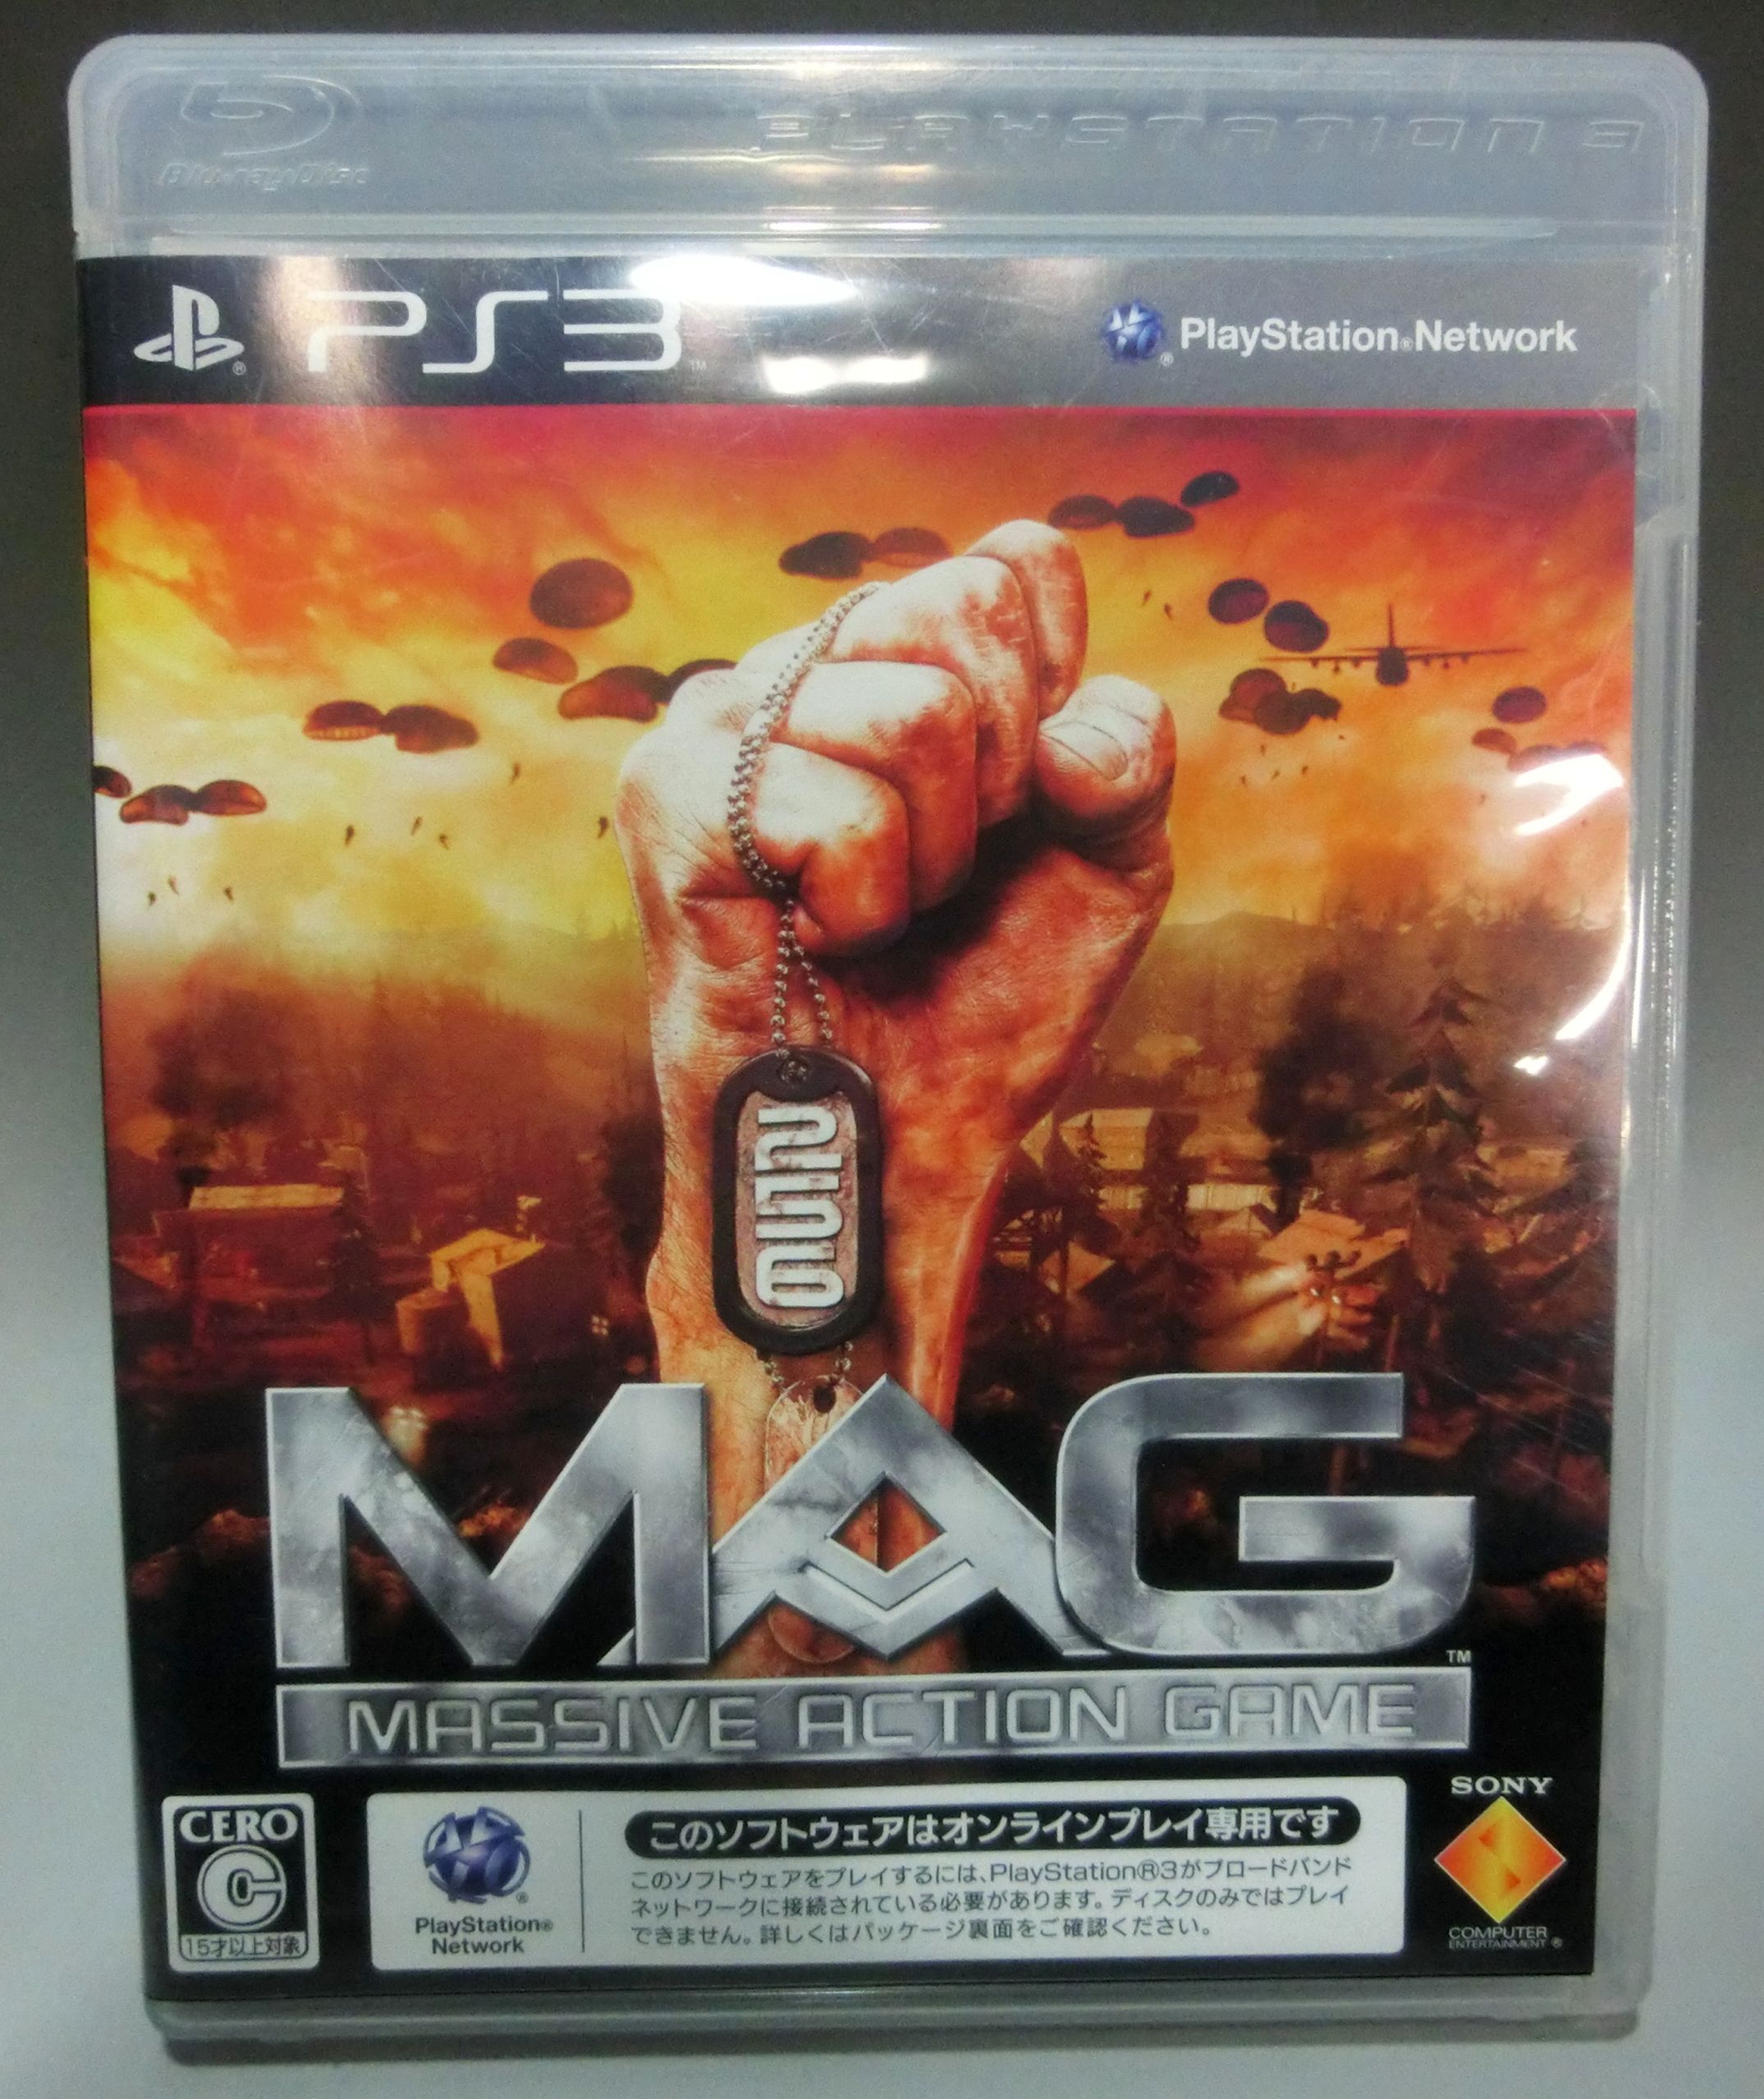 PS3用ソフト MASSIVE ACTION GAME (MAG)